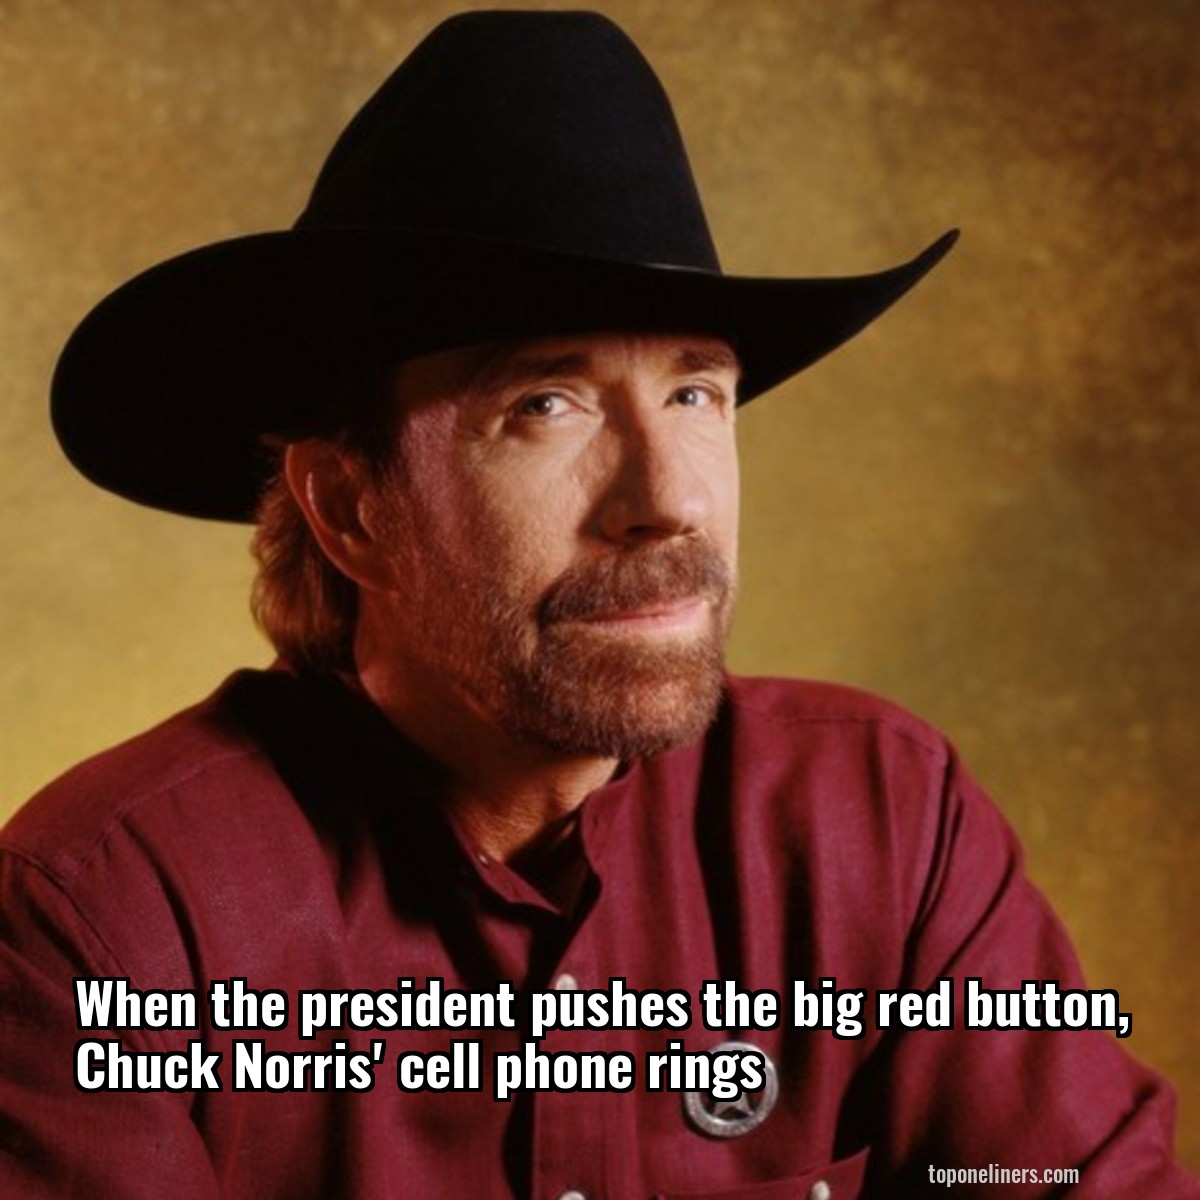 When the president pushes the big red button, Chuck Norris' cell phone rings